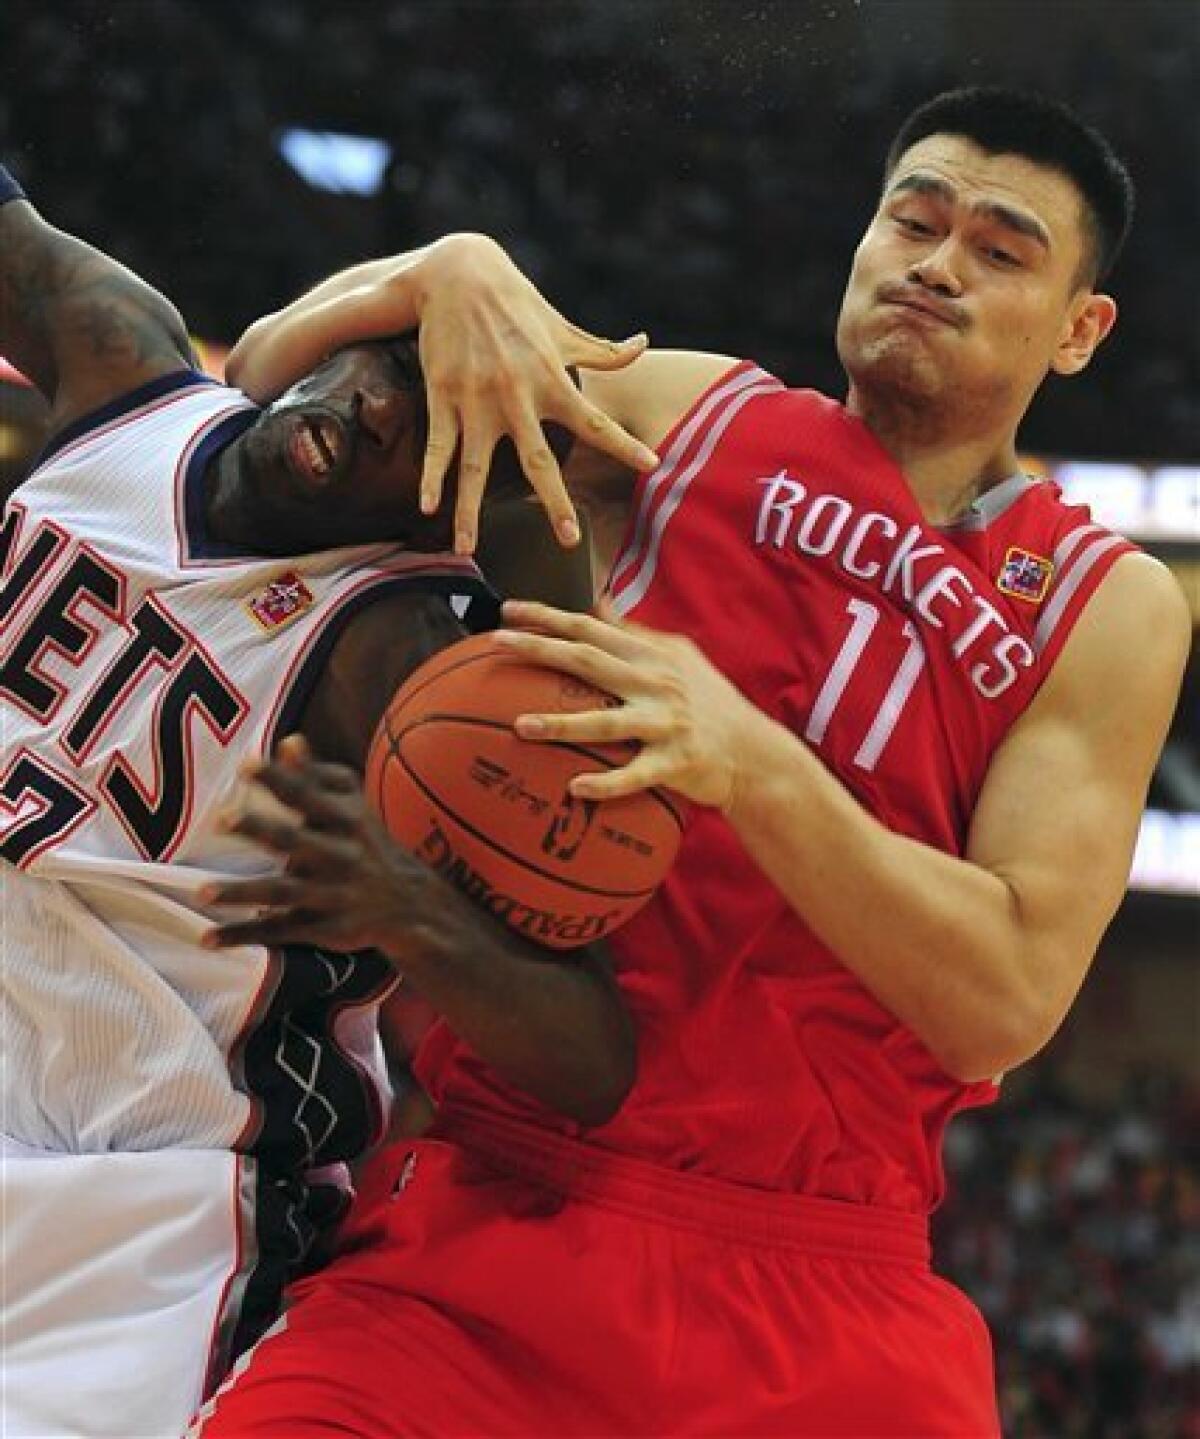 Houston Rockets Fans in China Need to 'Watch Games and Be Low Key